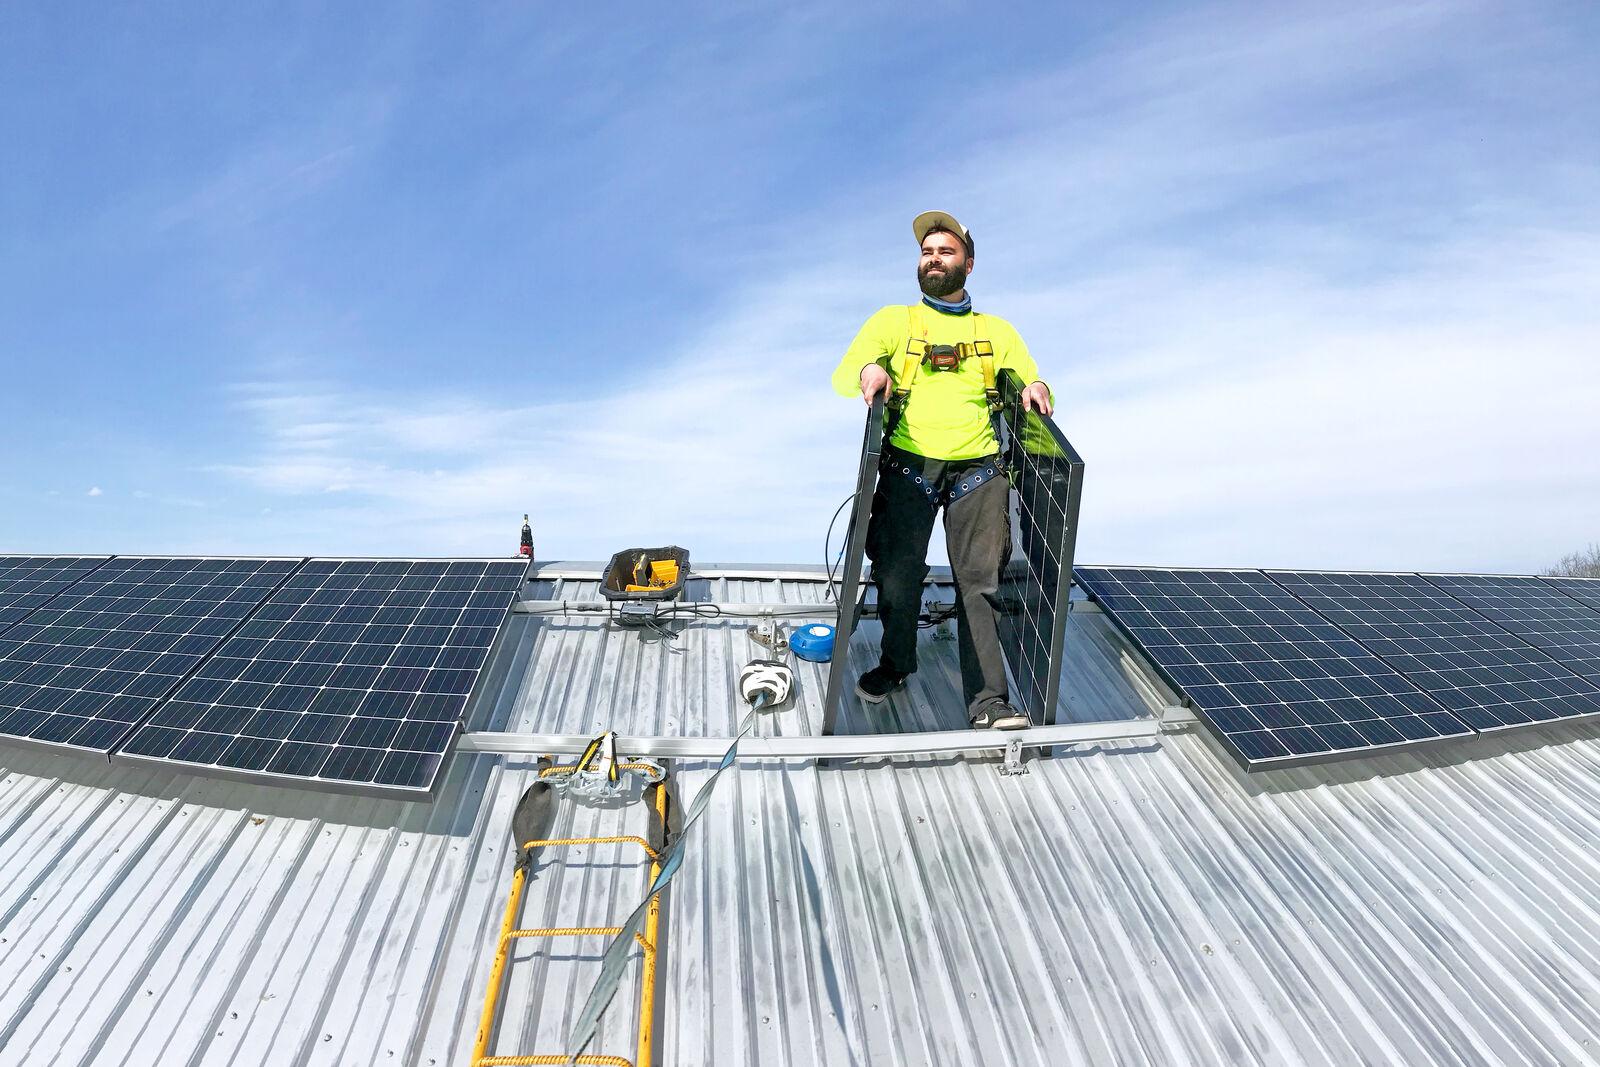 ReVision Energy Ranks #1 in New England, #5 Nationally in Top Rooftop Solar Installer List